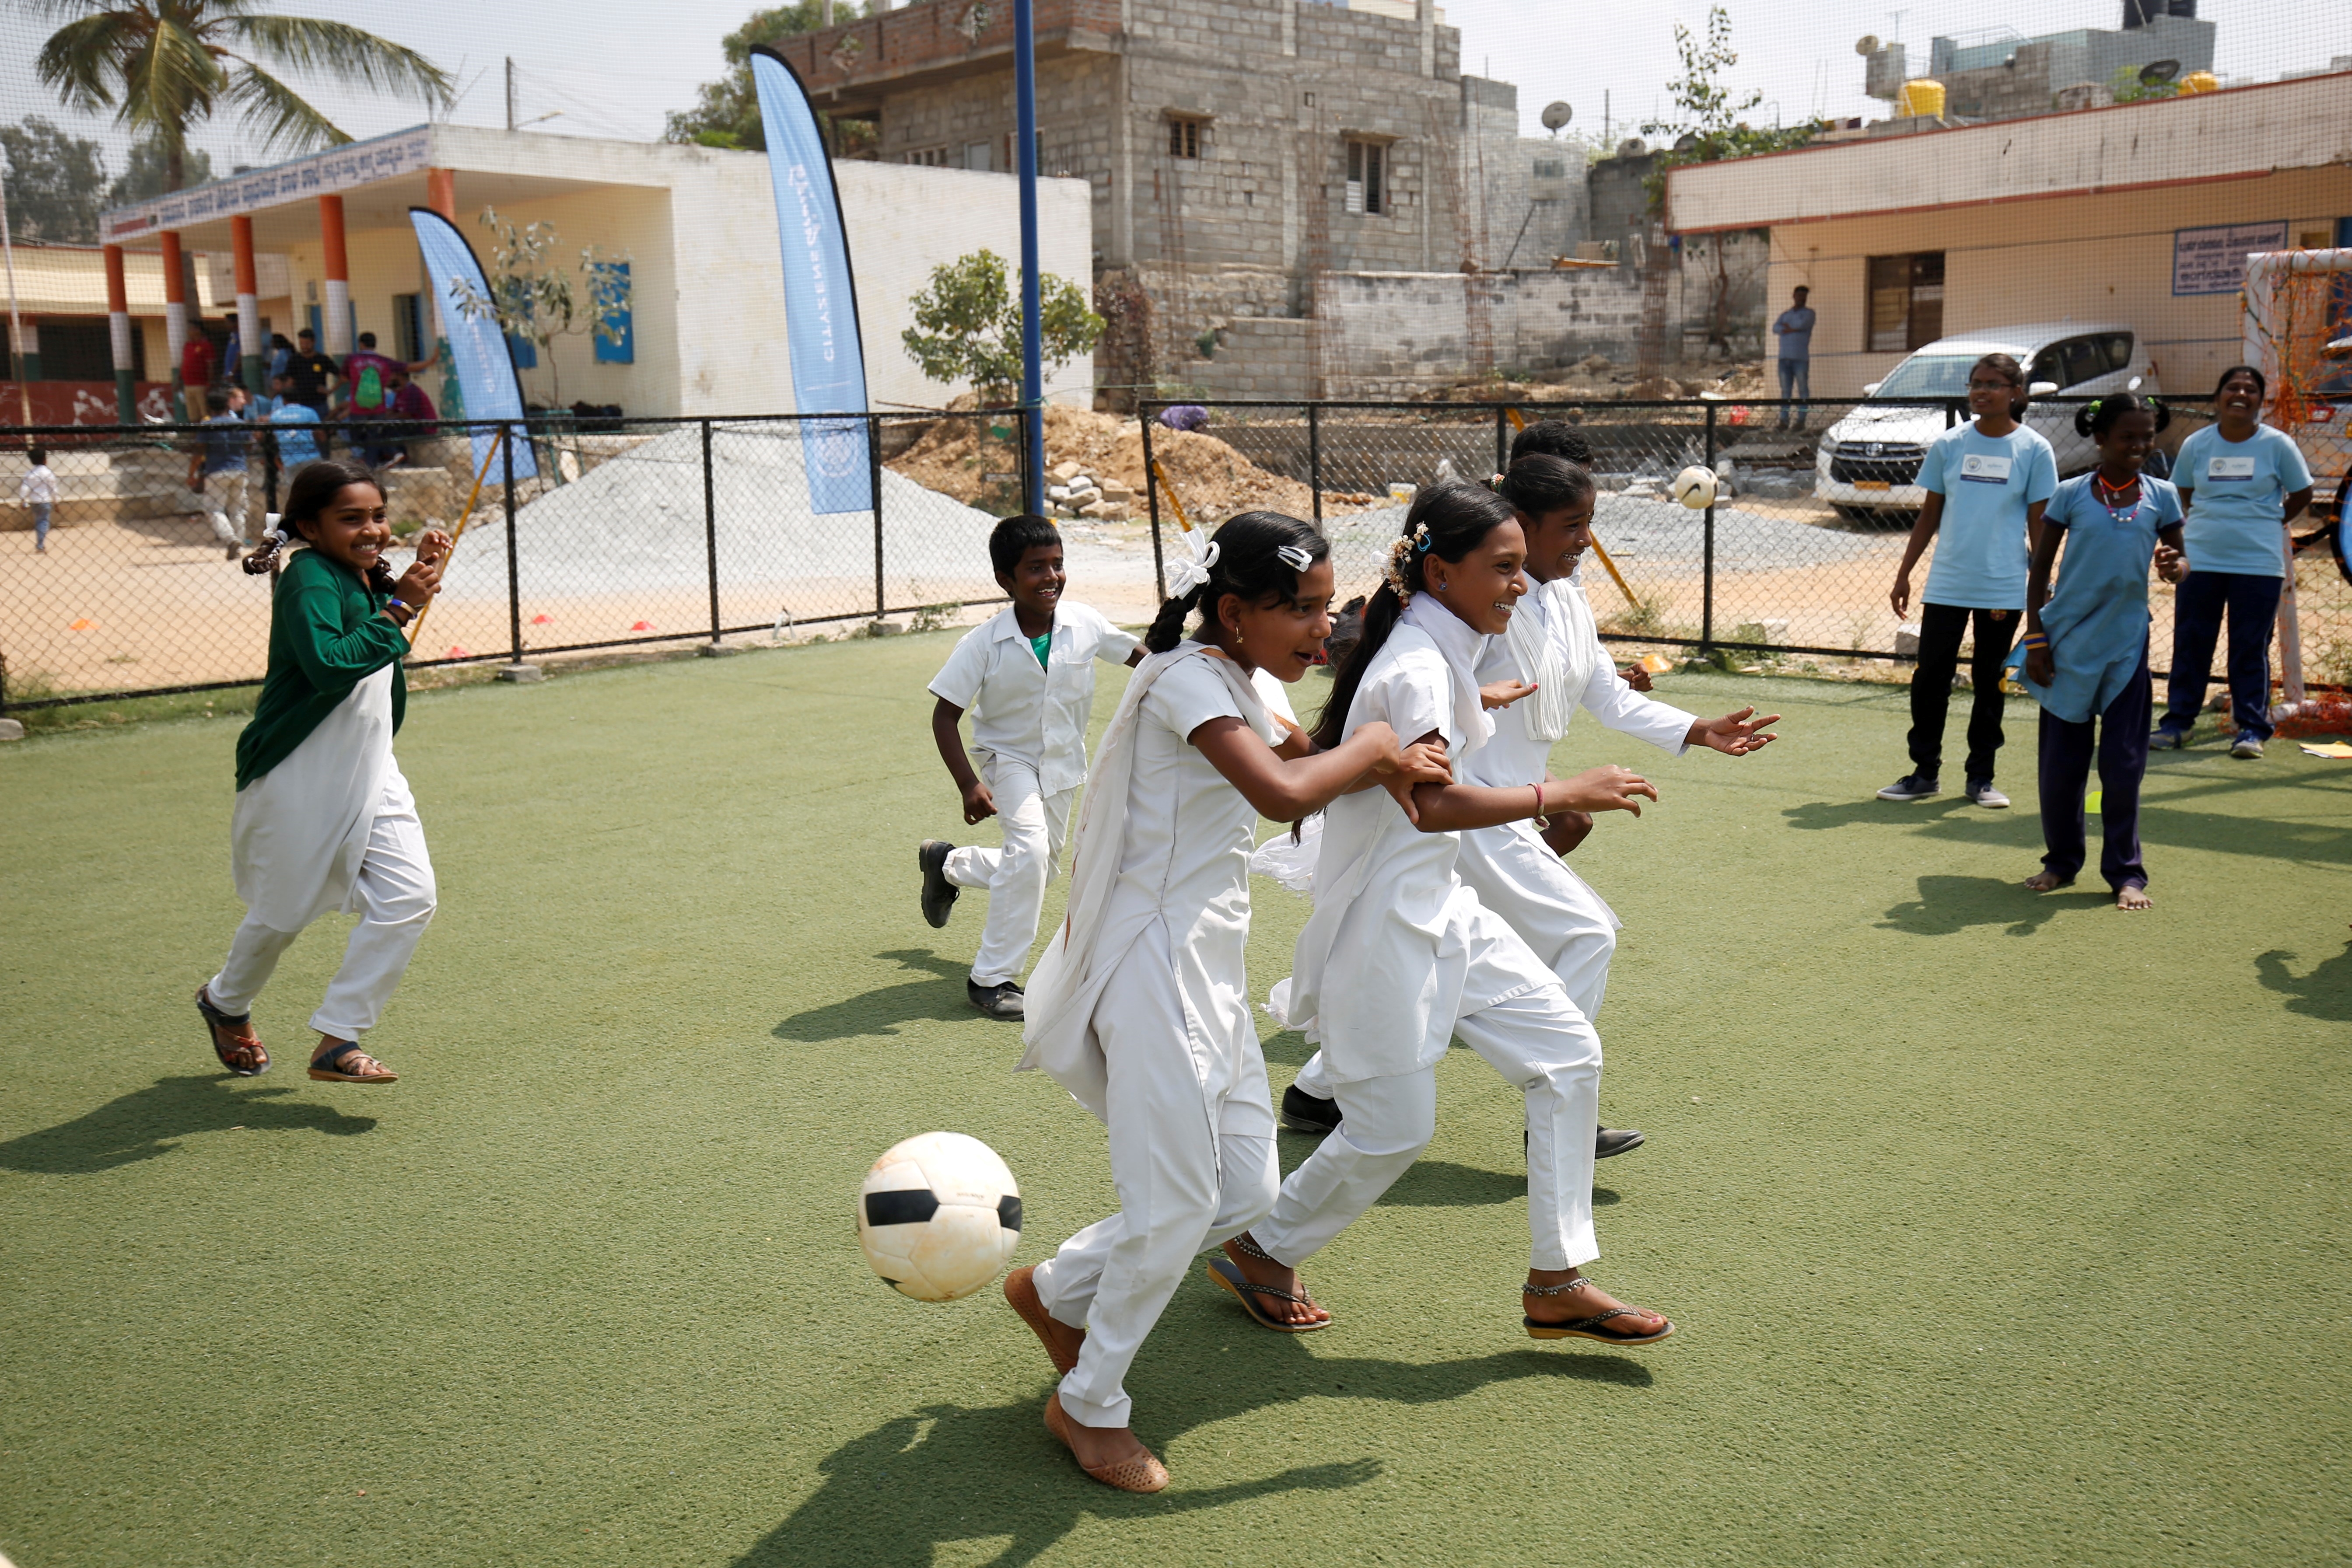 Children take part in a game